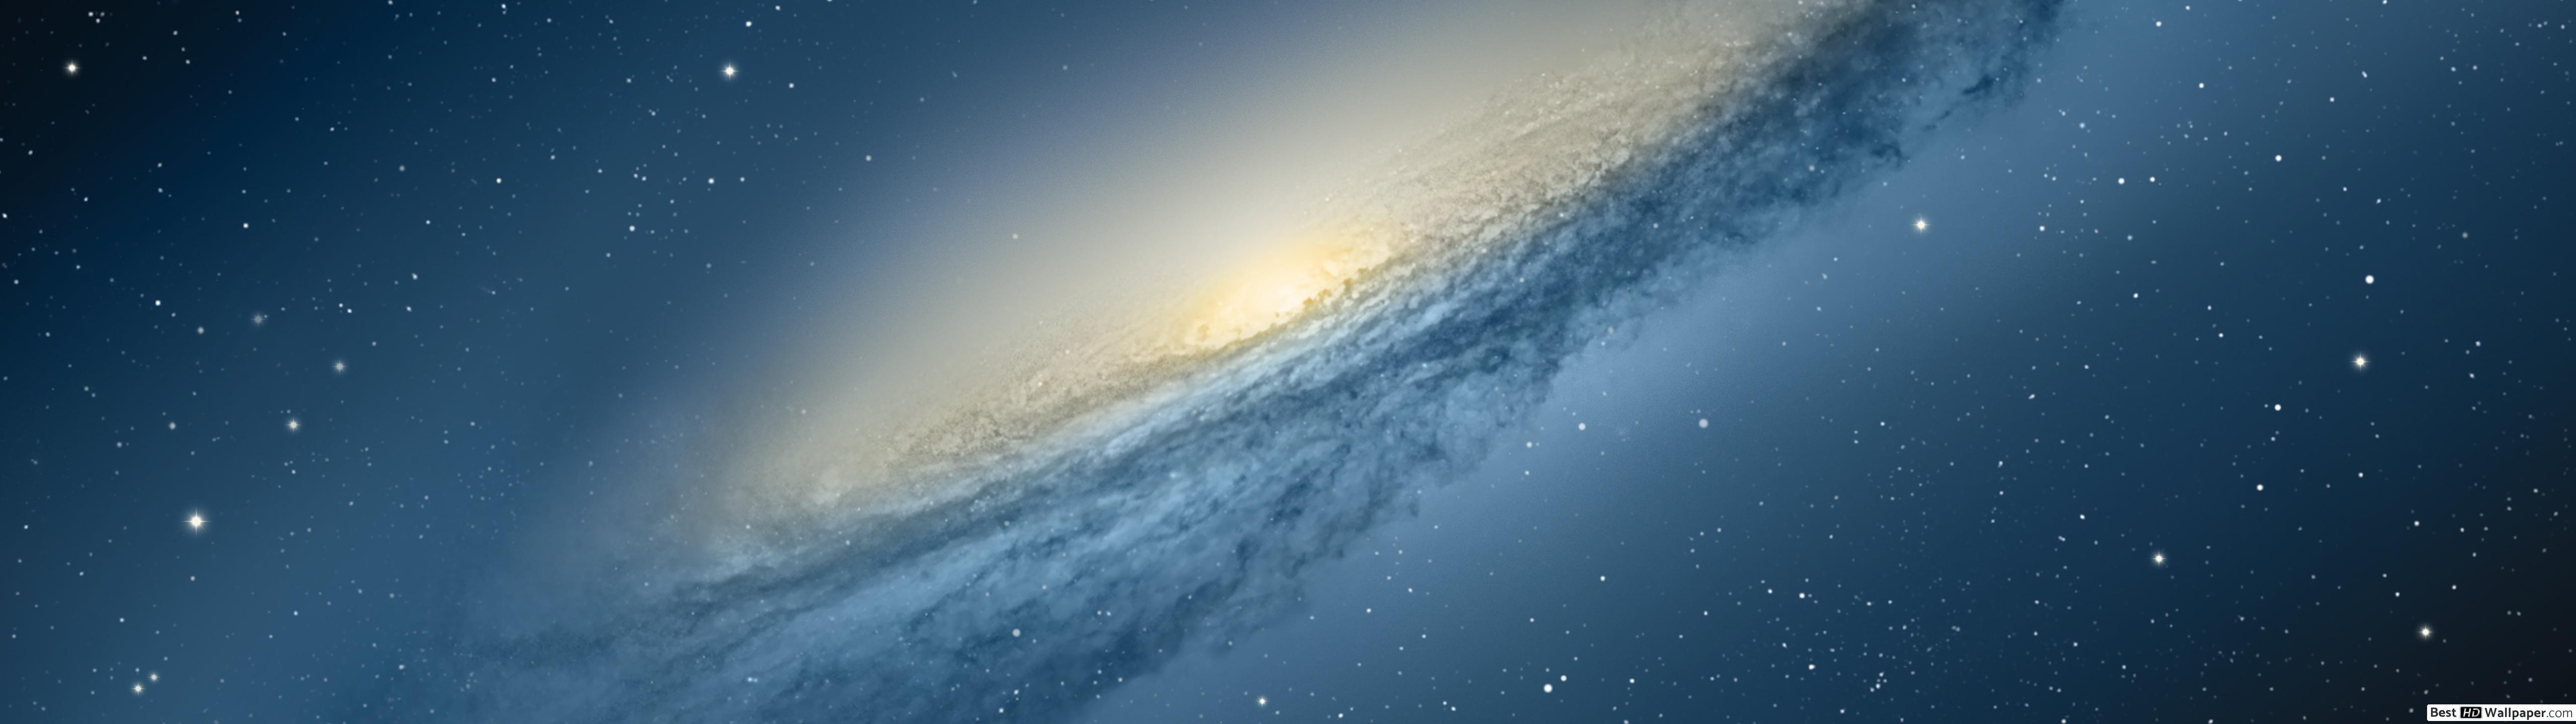 5120x1440 Space Wallpapers - Top Free 5120x1440 Space Backgrounds ...